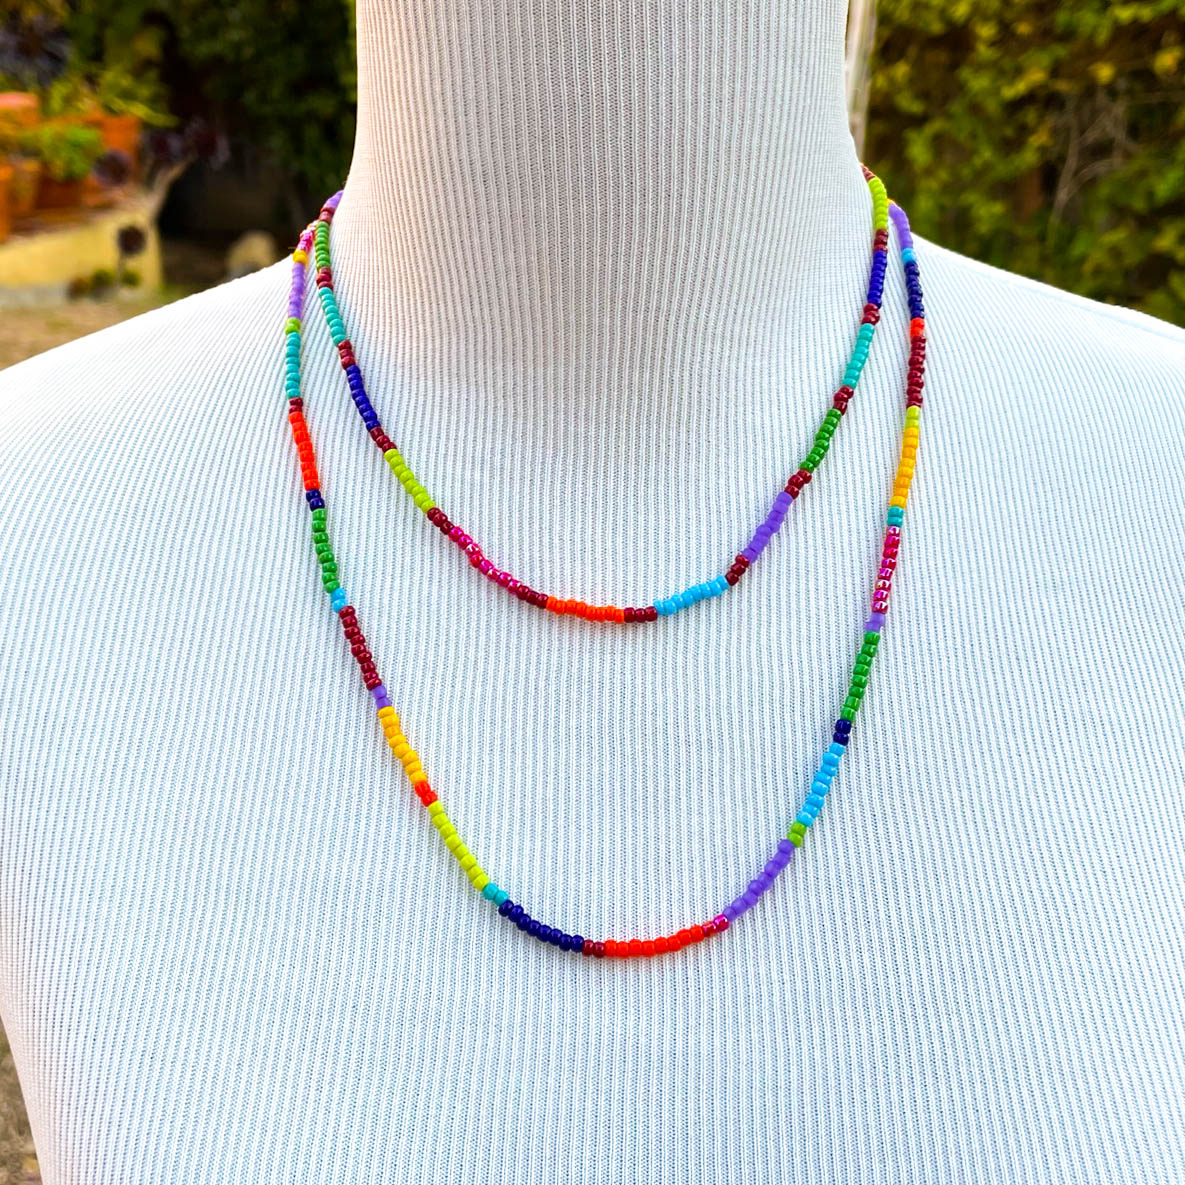 Wrap Necklace, Lariat Necklace, Colorful Bead Necklace, Long Tie Choker,  Wrap Seed Bead, Christmas Gift Woman, Wrapped Beaded Choker - Etsy Ireland  | Beaded necklace designs, Bead jewellery, Beaded necklace